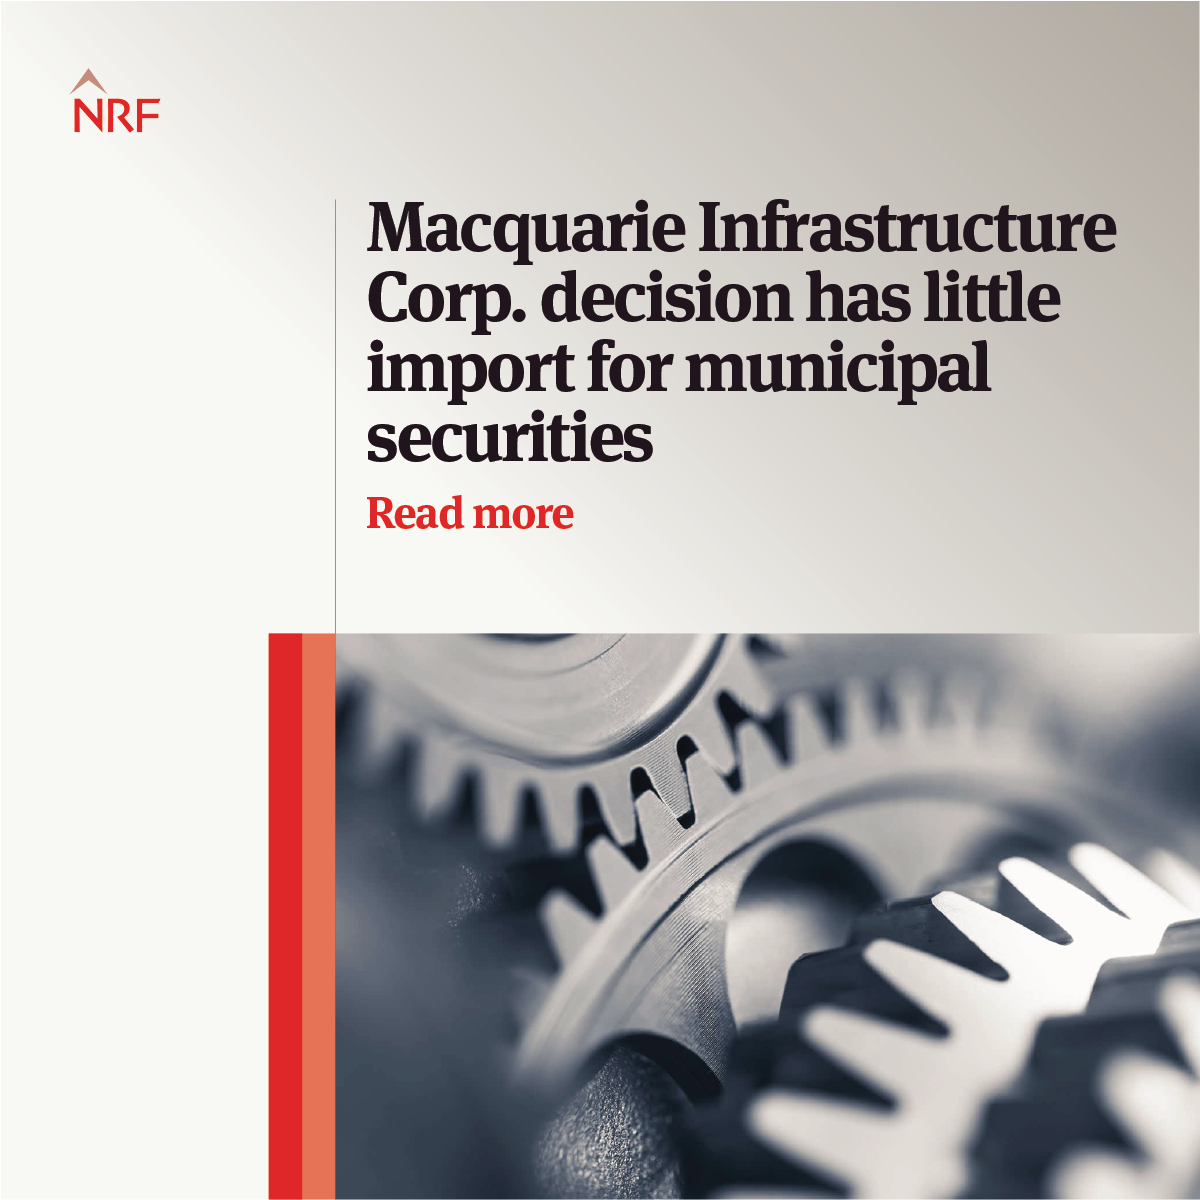 Rick Weber, Larry Bauer and Mallary Preston discuss the significance of the Macquarie Infrastructure Corp. decision on municipal securities. ow.ly/9vz150RmFCP